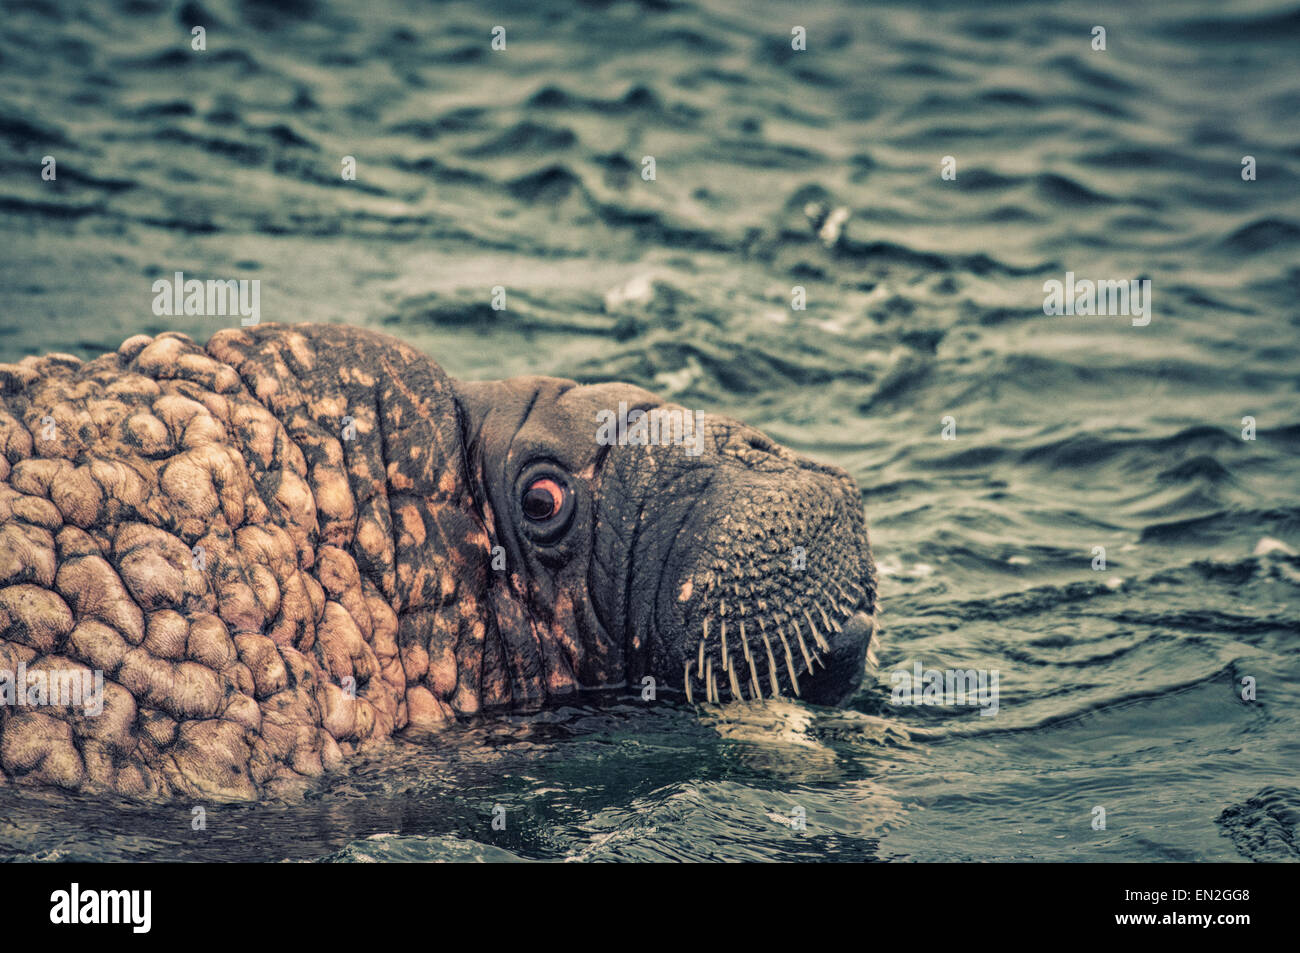 Scared or scary close up of a Walrus, Odobenus rosmarus, in the water, color altered for effect, Svalbard Archipelago, Norway Stock Photo